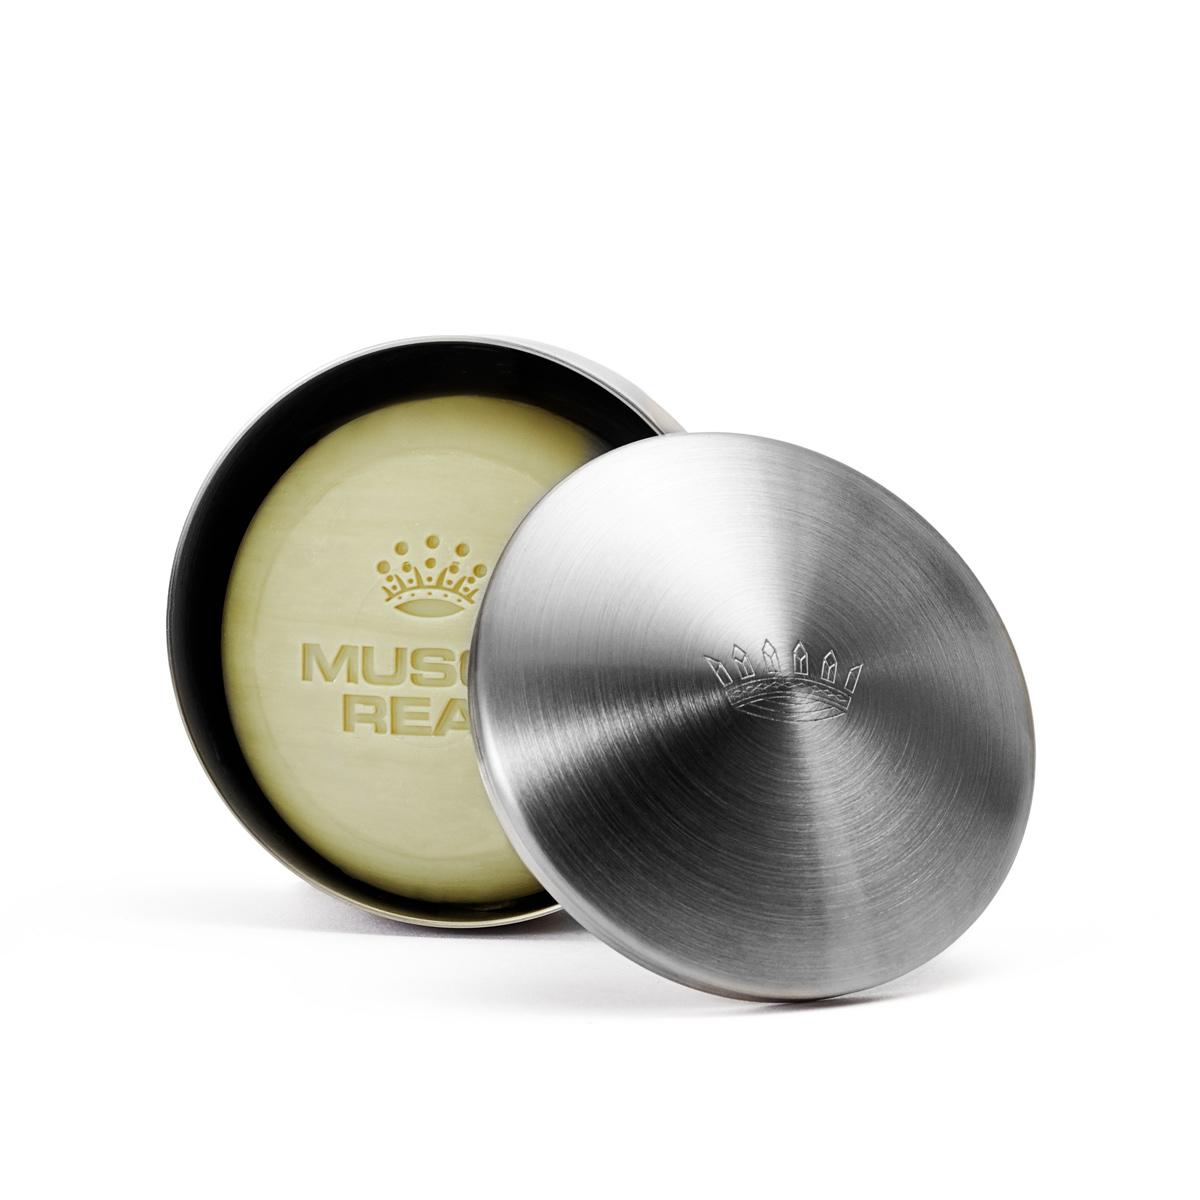 Musgo Real Shaving Bowl and Shaving Soap, Classic Scent